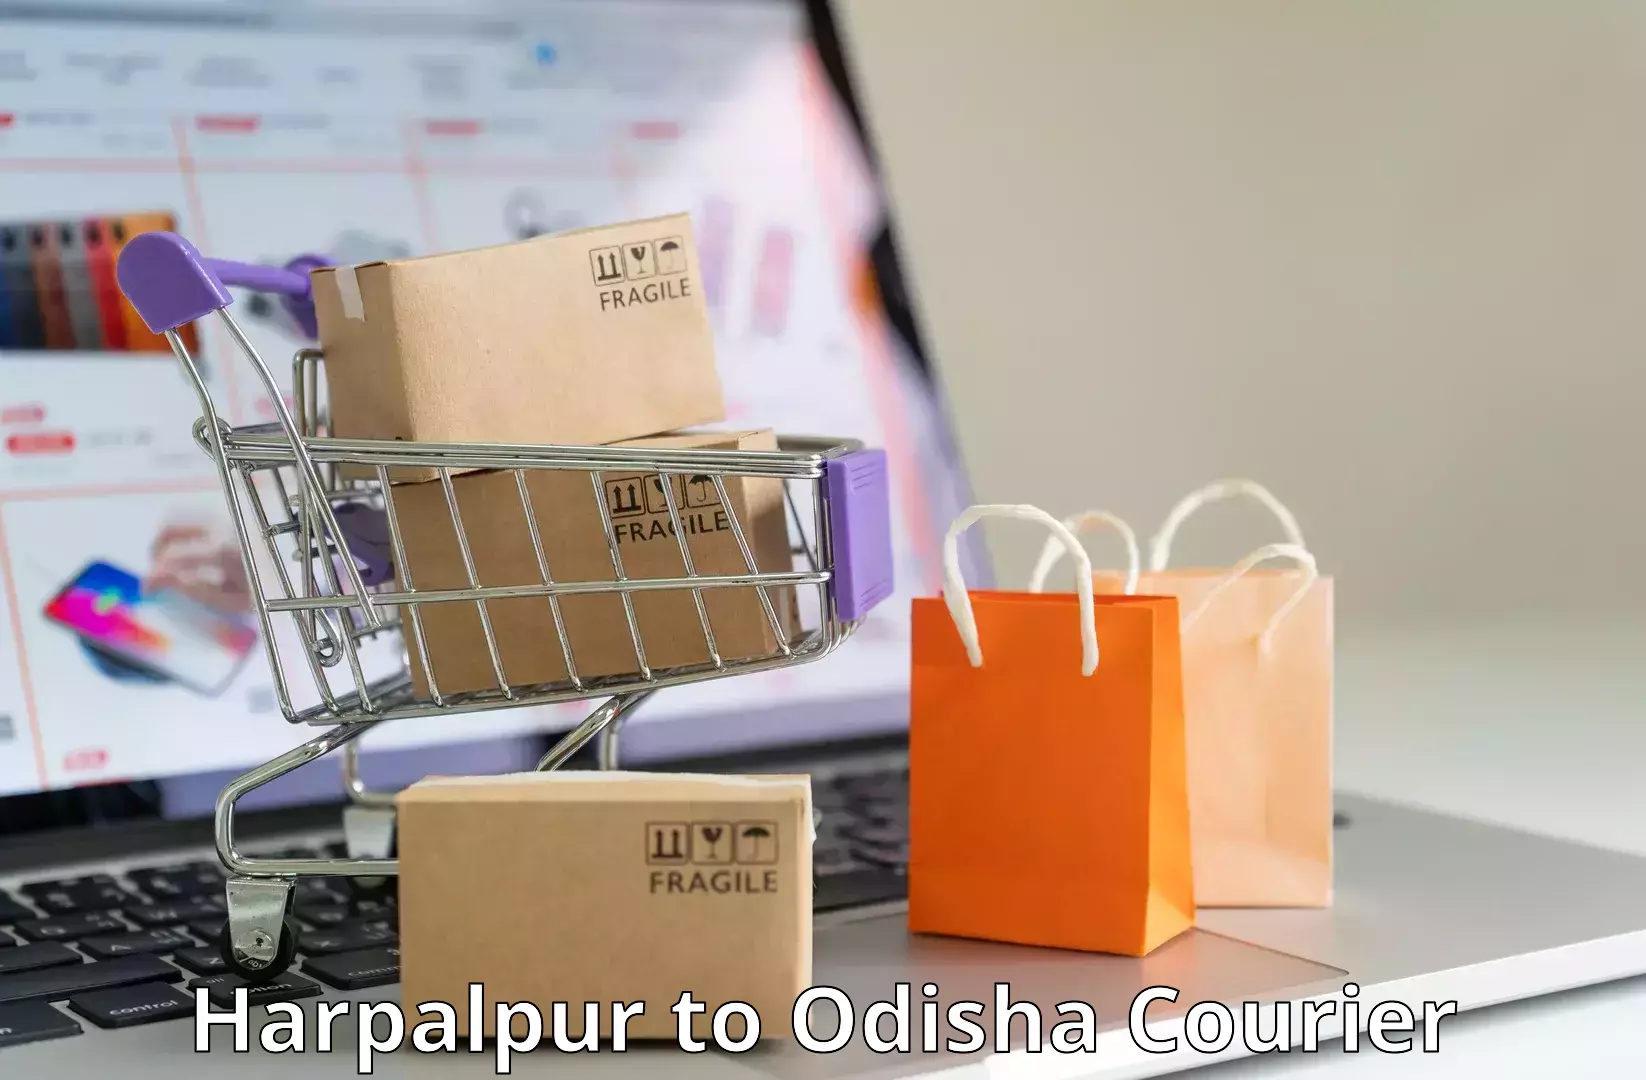 Large-scale shipping solutions Harpalpur to Puri